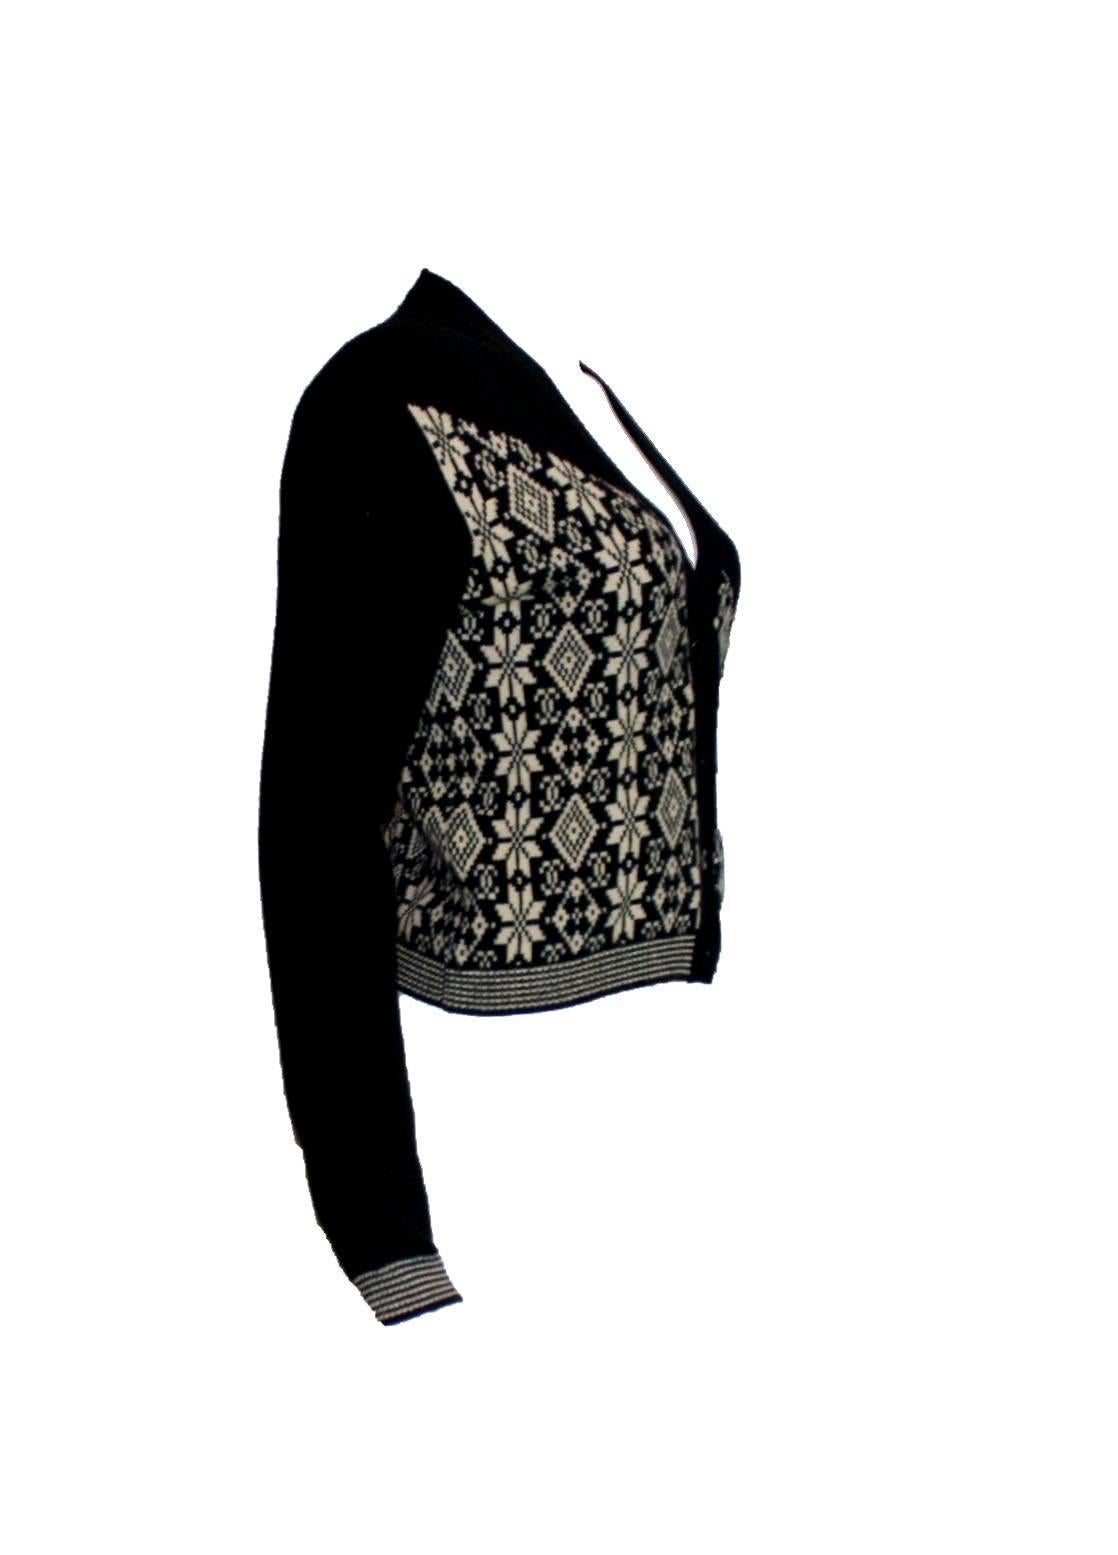 Beautiful Chanel cashmere cardigan
In monochrome color
With CC logo print
CC logo buttons
Perfect for a chalet weekend
Combine it with Jeans and boots for the perfect casual look or with a black pencil skirt for a more formal outfit
Fashion jewelry